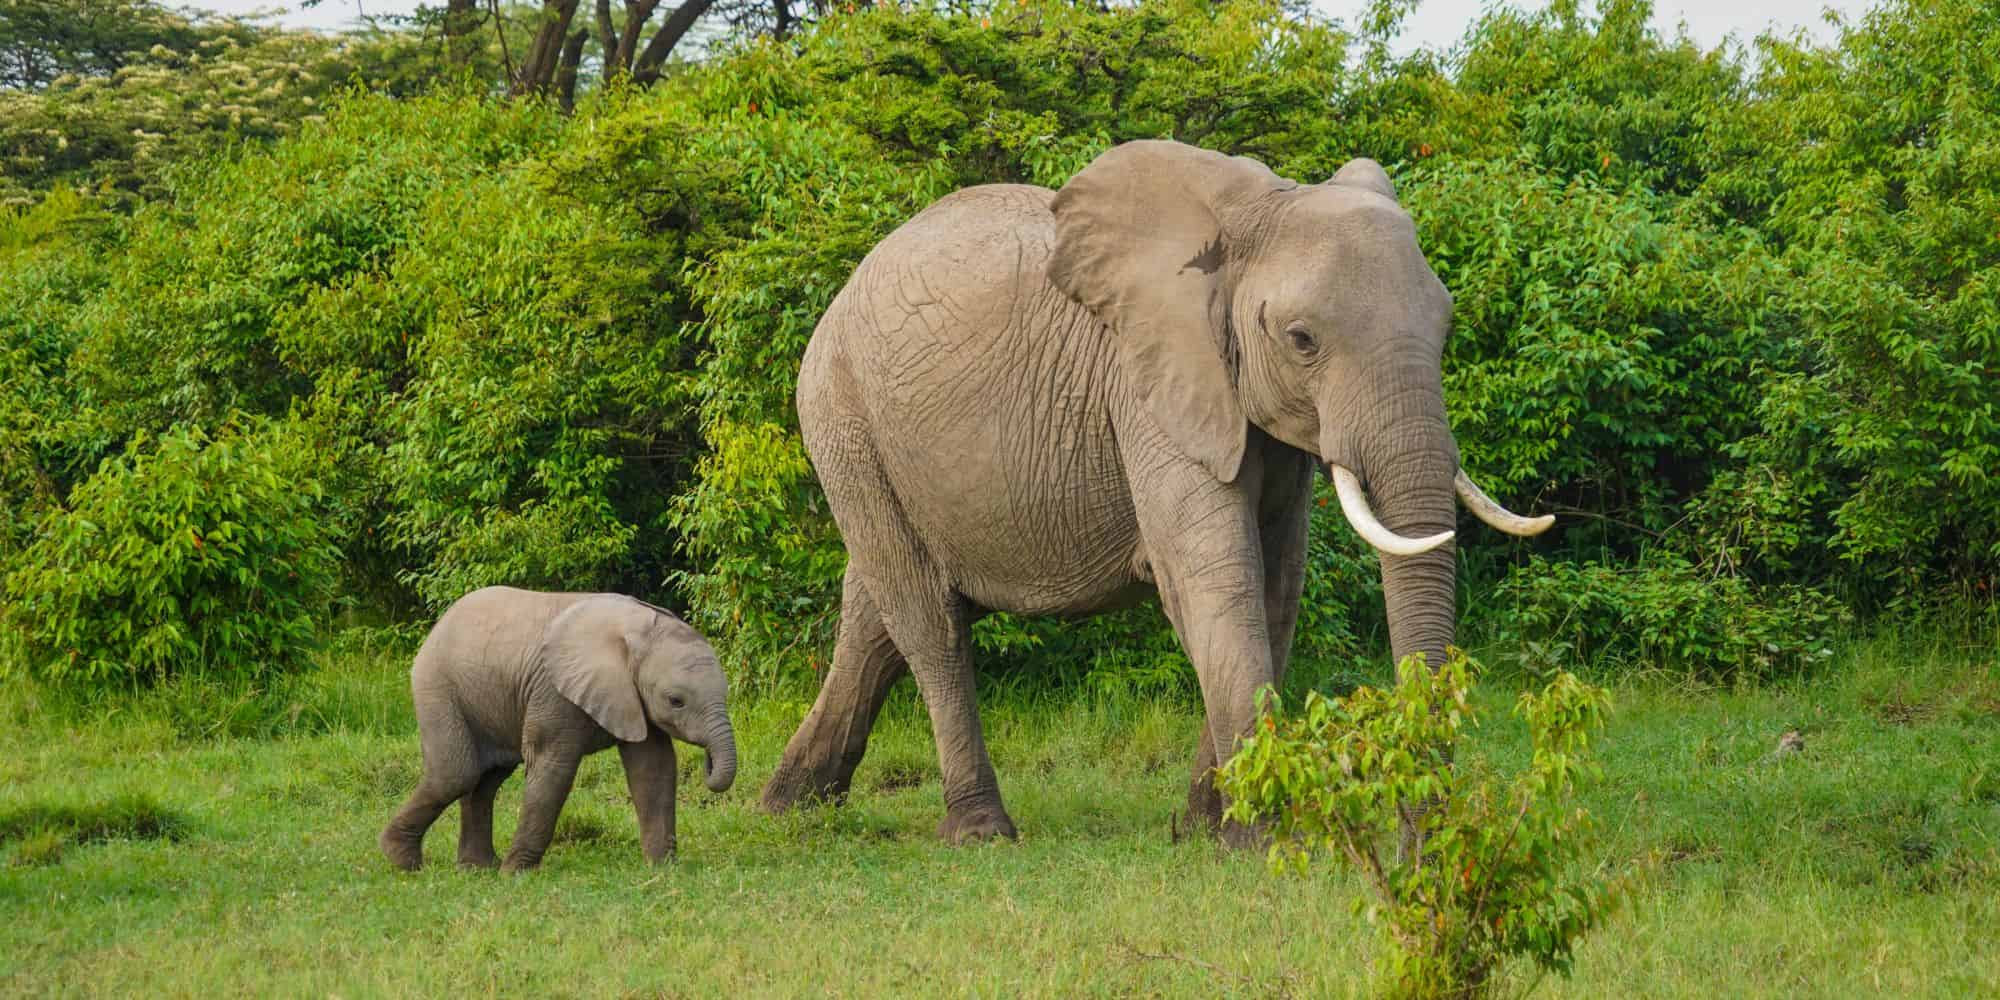 Elephants in a Sri Lankan dump are dying from eating plastic rubbish.